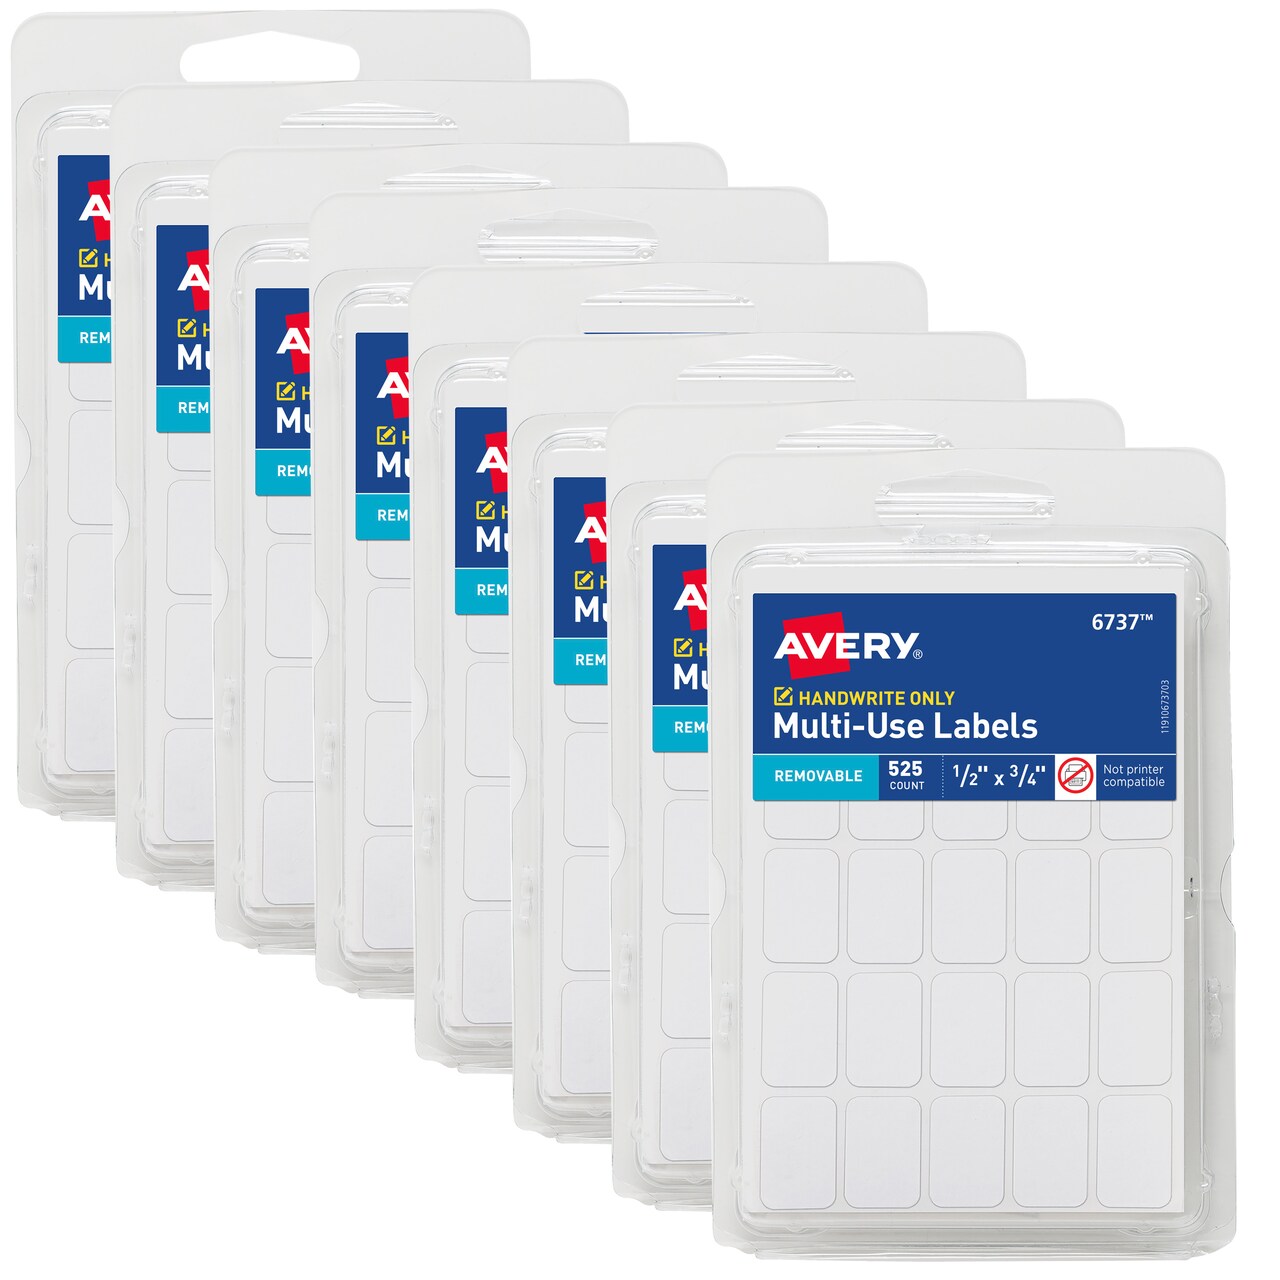 Avery Multi-Use Removable Labels, 1/2 x 3/4, White, Non-Printable, 8  Packs, 4,200 Blank Labels Total (21934)